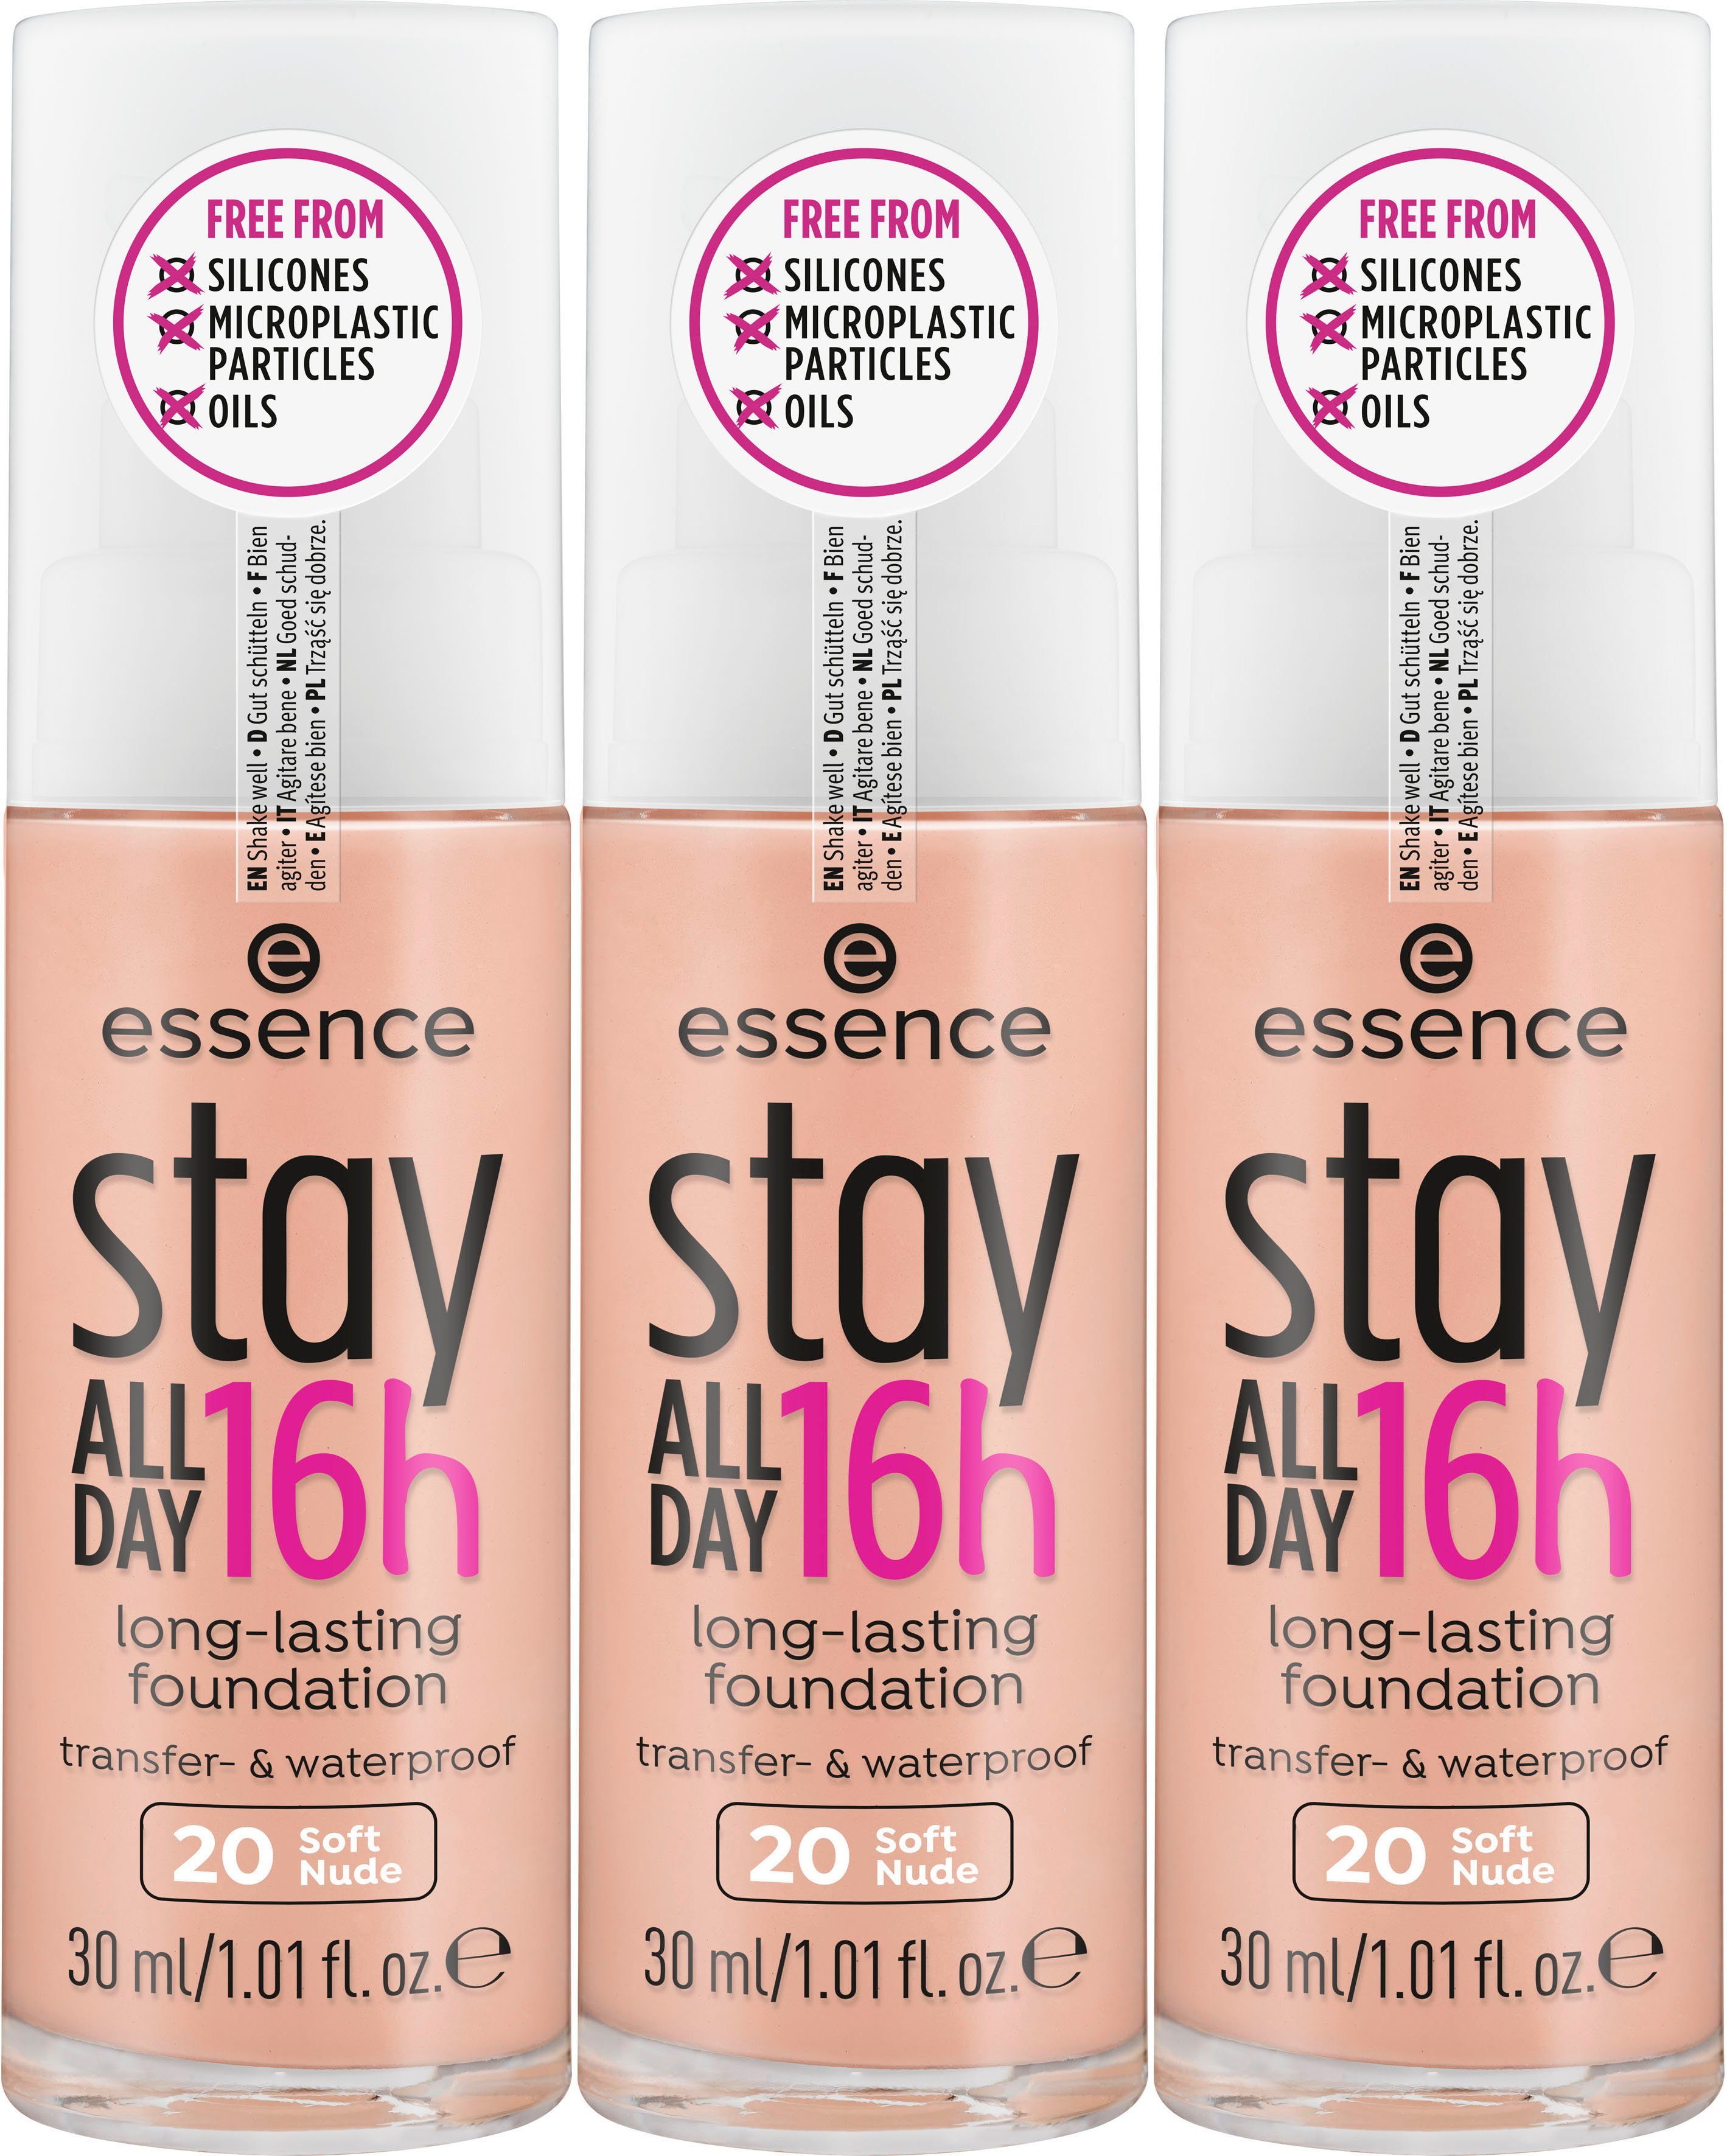 Essence Foundation long-lasting, stay ALL DAY 16h